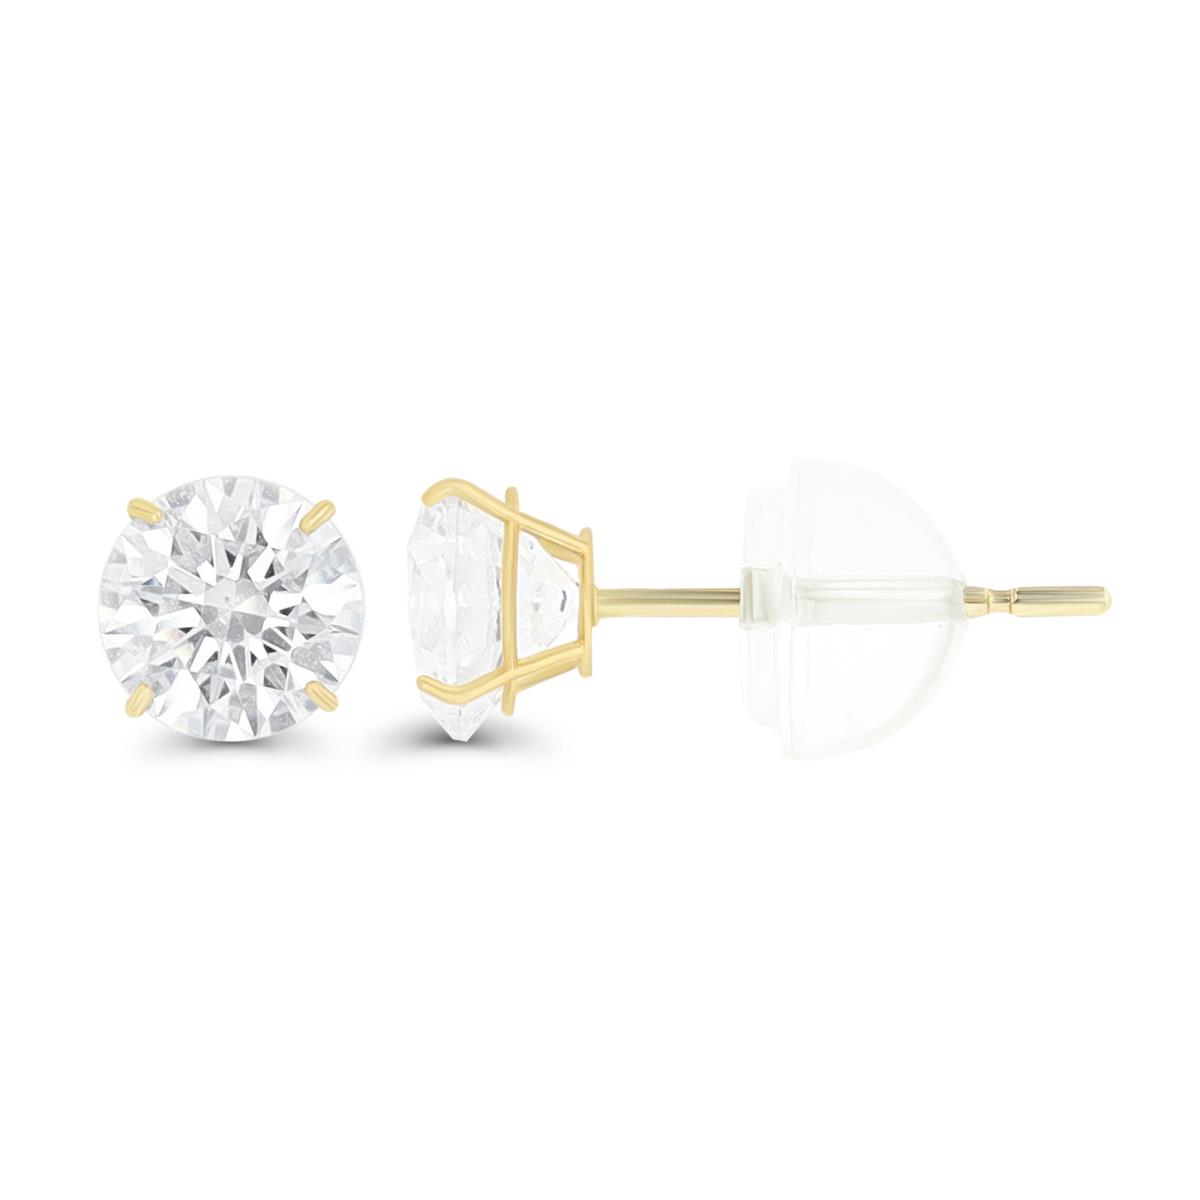 14K Yellow Gold 7mm Rd White Swarovski Zirconia 4-Prong Cast Basket Solitaire Earring & Silicone Bubble Back